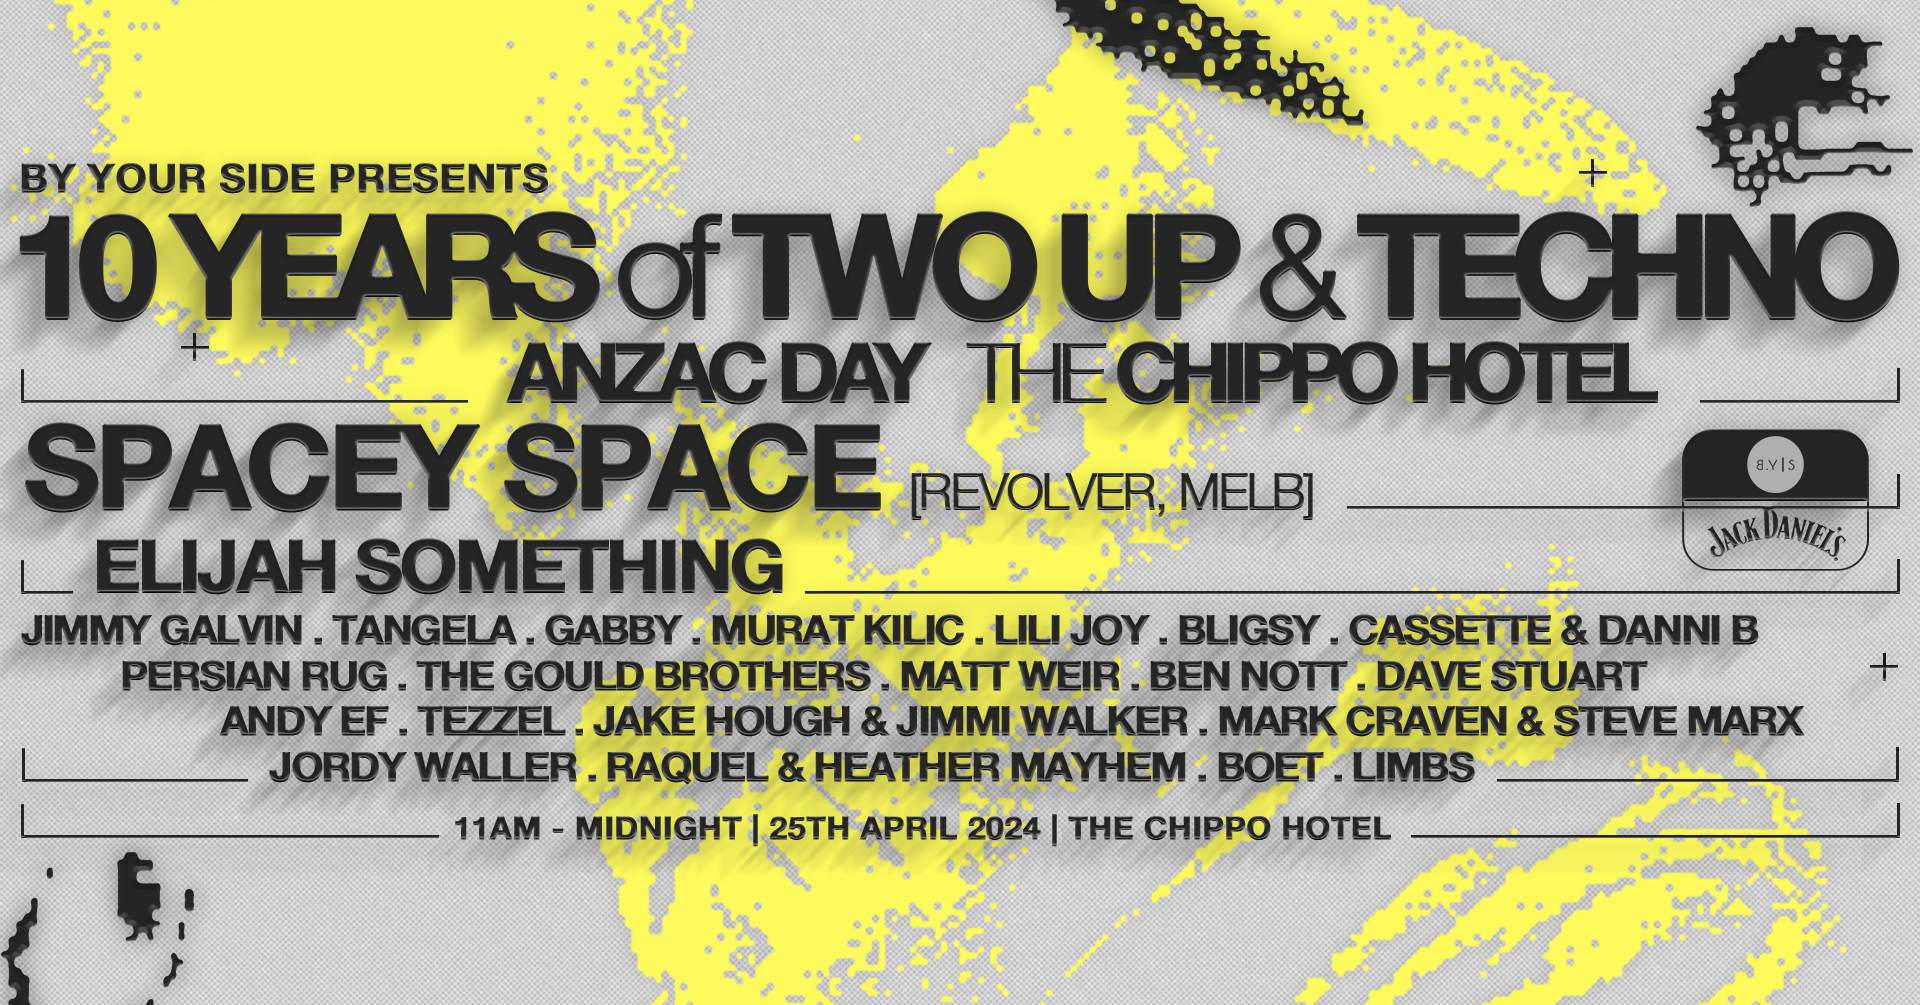 10 years of two up and ANZAC Day - フライヤー表